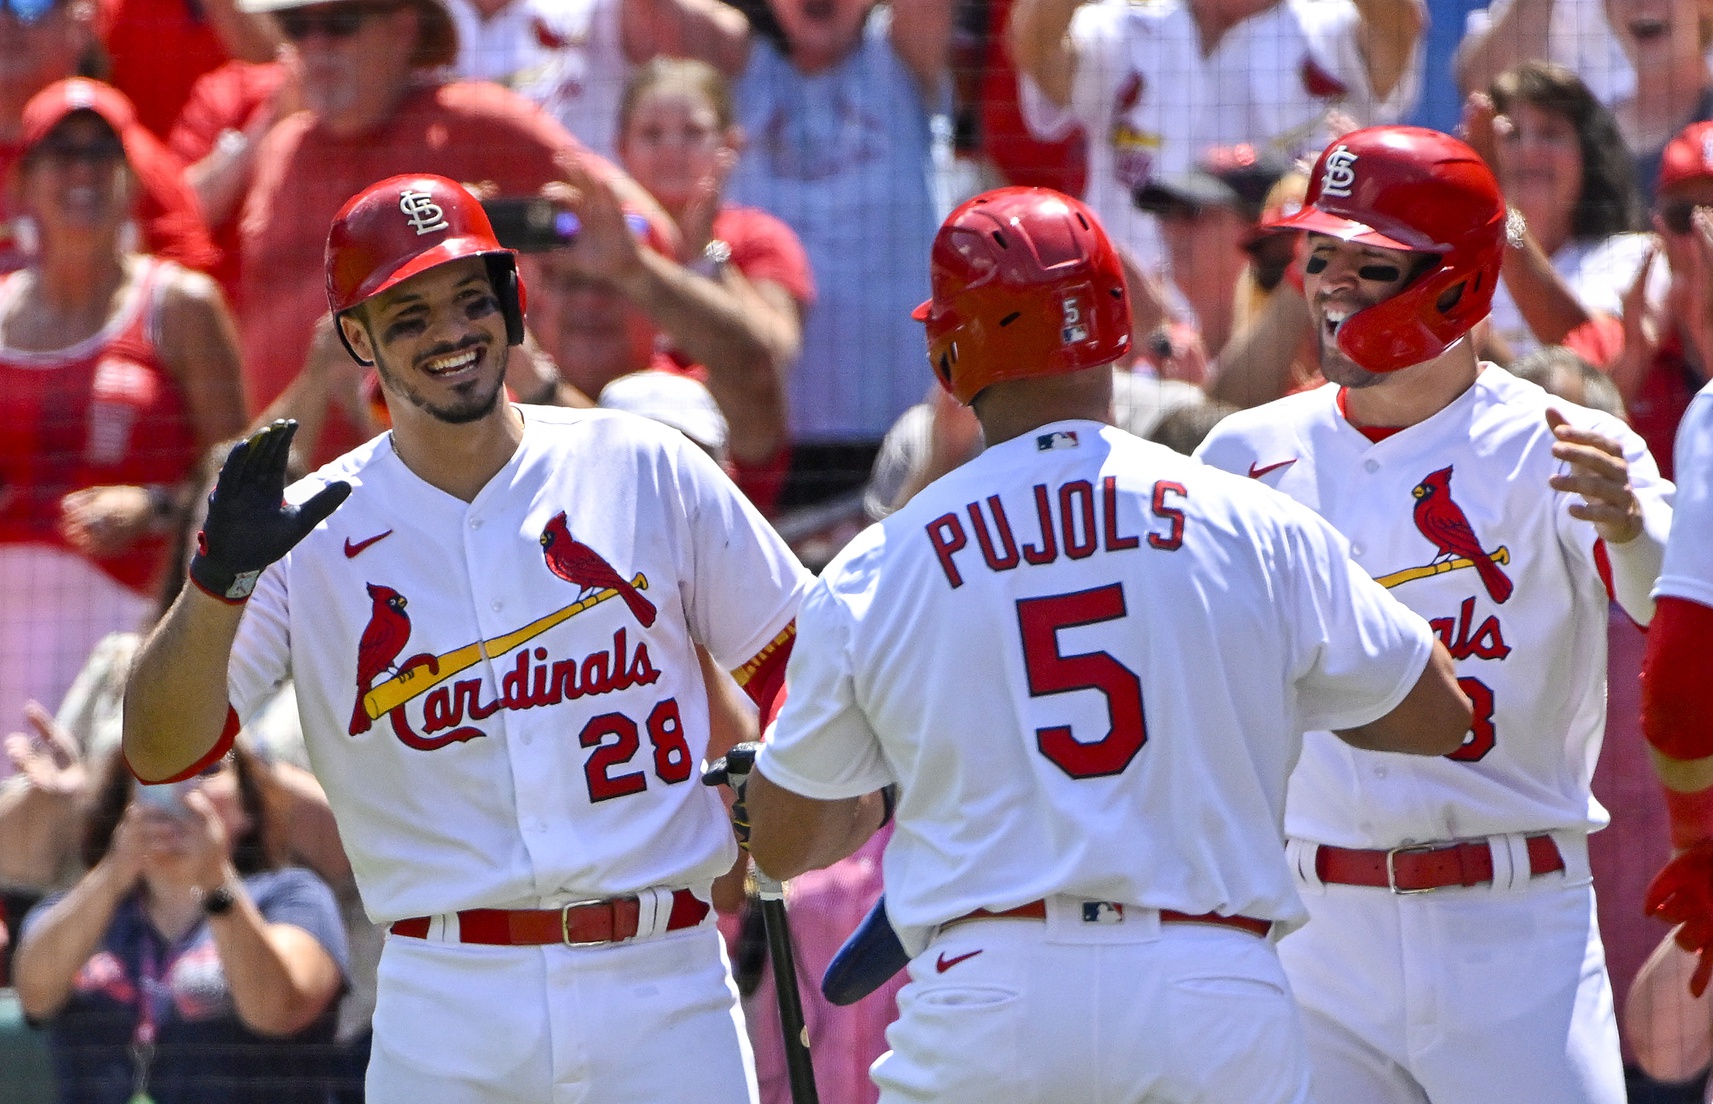 Pujols hits 2 HRs, Molina pitches as Cards romp